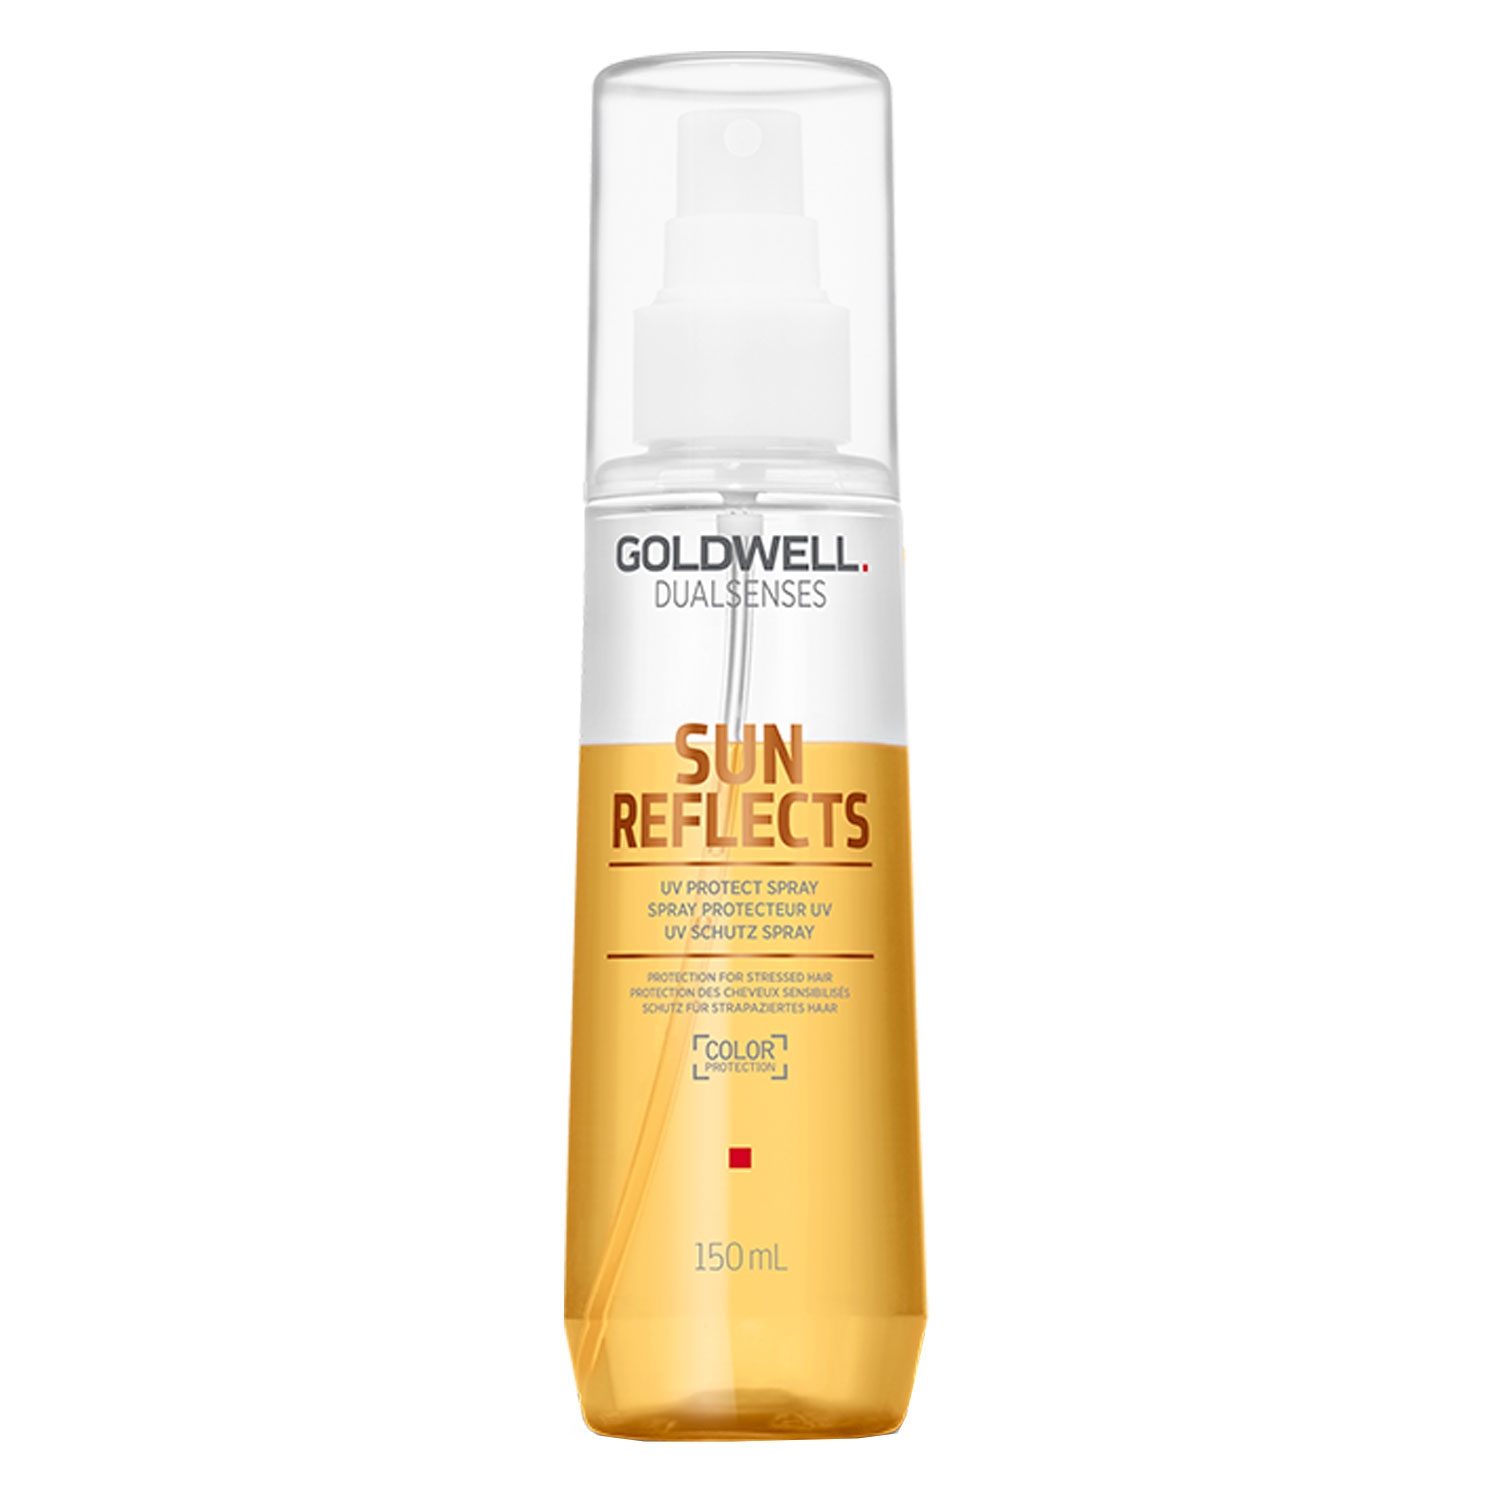 Product image from Dualsenses Sun Reflects - UV Protect Spray